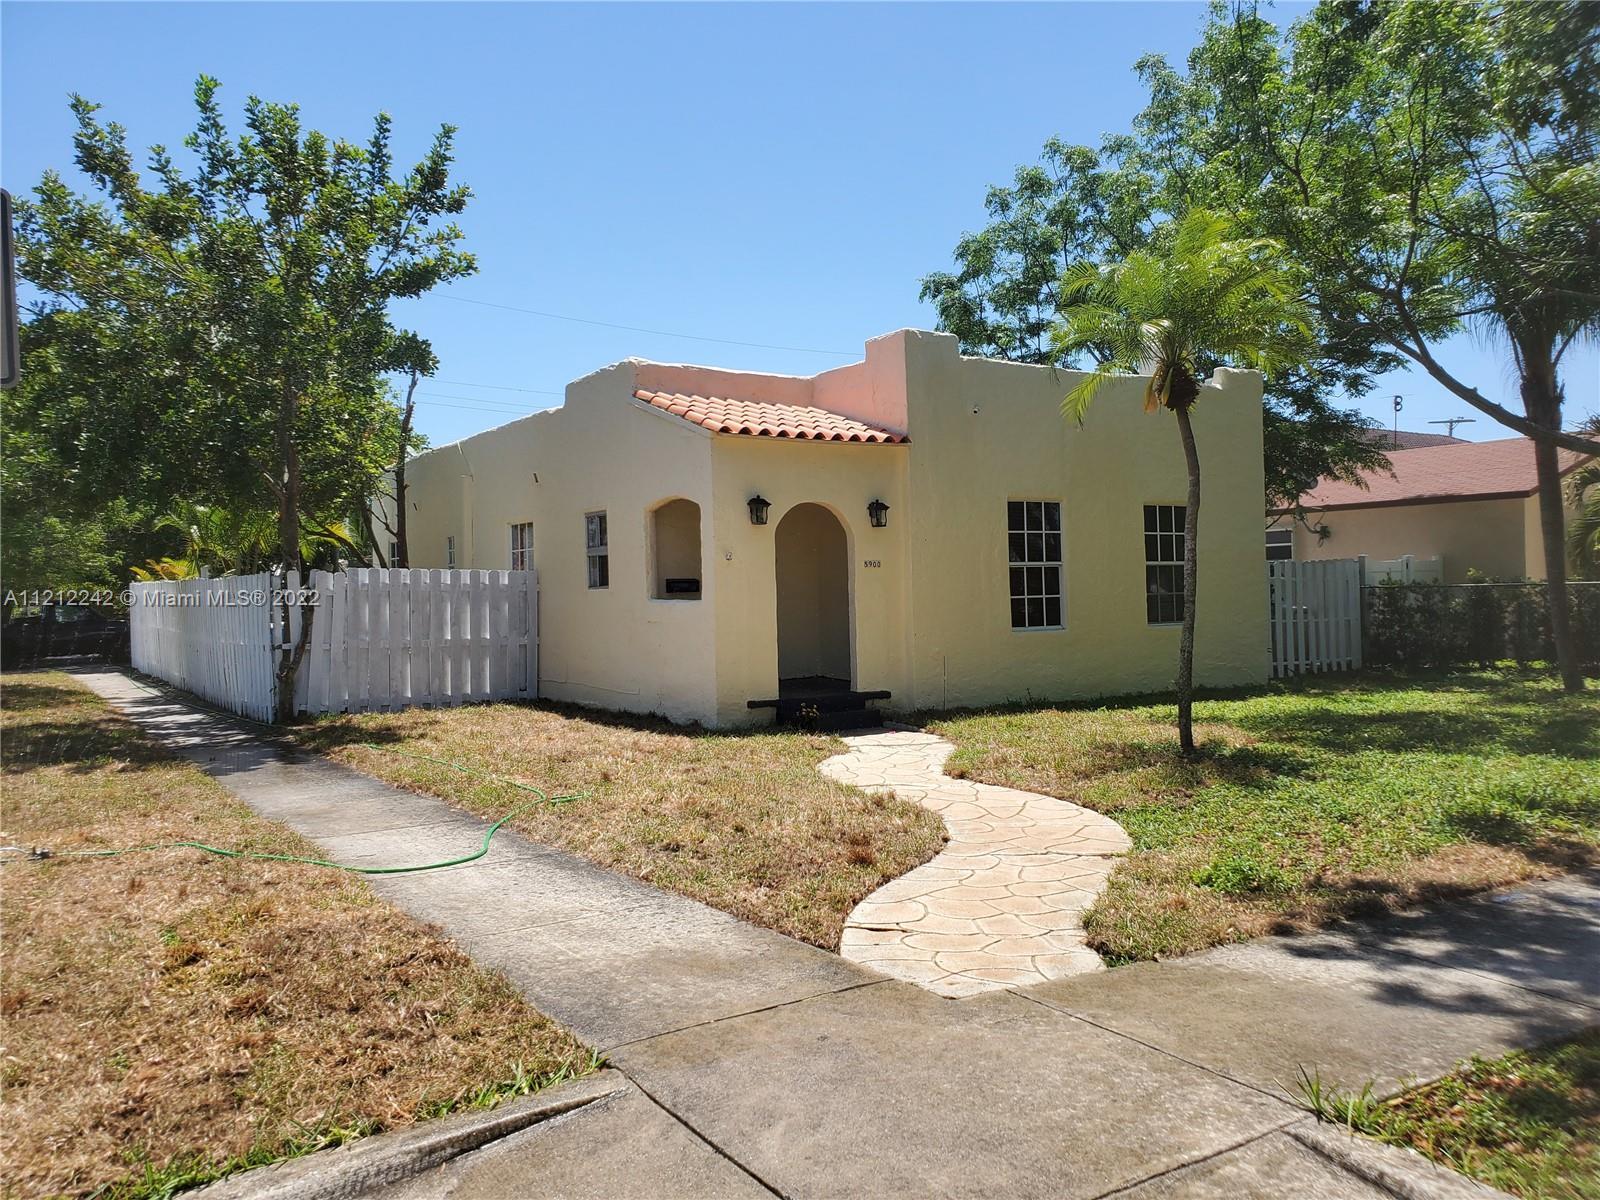 EASY TO SHOW! Beautiful Spanish style tree laden corner property in a great neighborhood. Main house